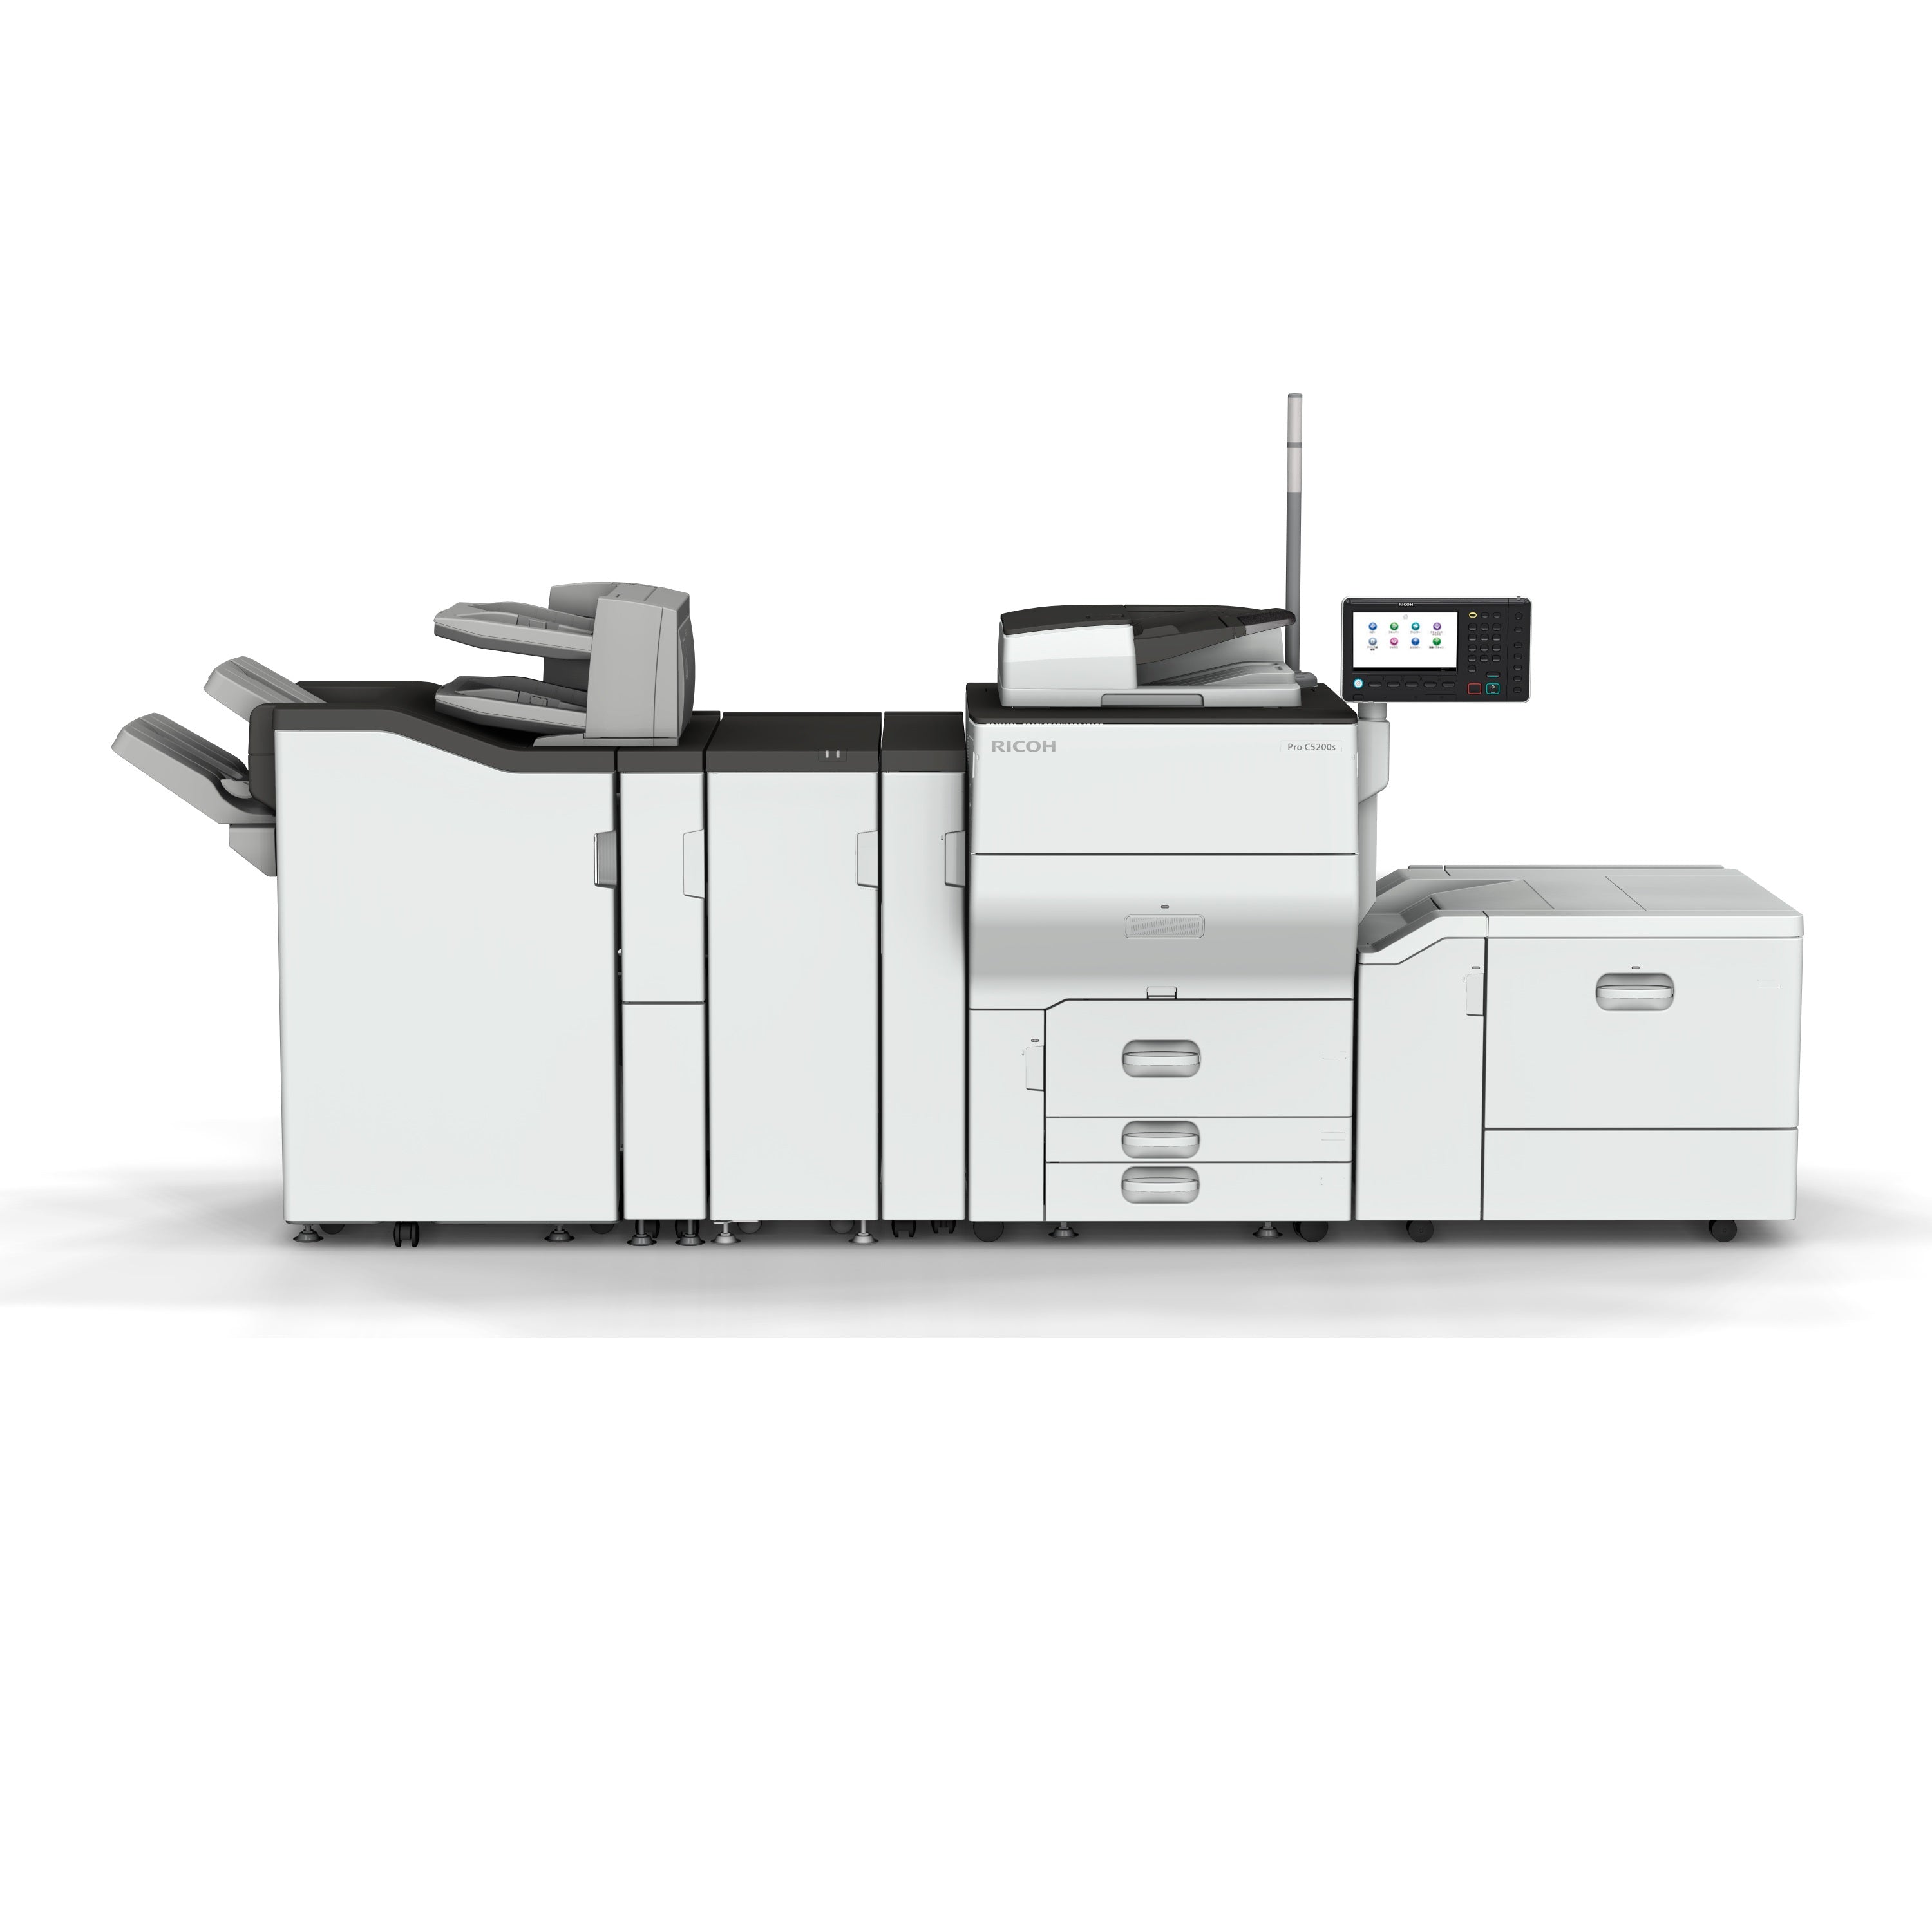 Absolute Toner $165.33/Month VERY LOW PAGE COUNT Ricoh Pro C5200S With TRIPLE-CASSETTE(3) and 1200dip Resolution Multifunction Business Printer/Copier/Scanner/Fax Machine with ADVANCED FINISHER 3-HOLE PUNCH and SADDLE STITCHING Printers/Copiers